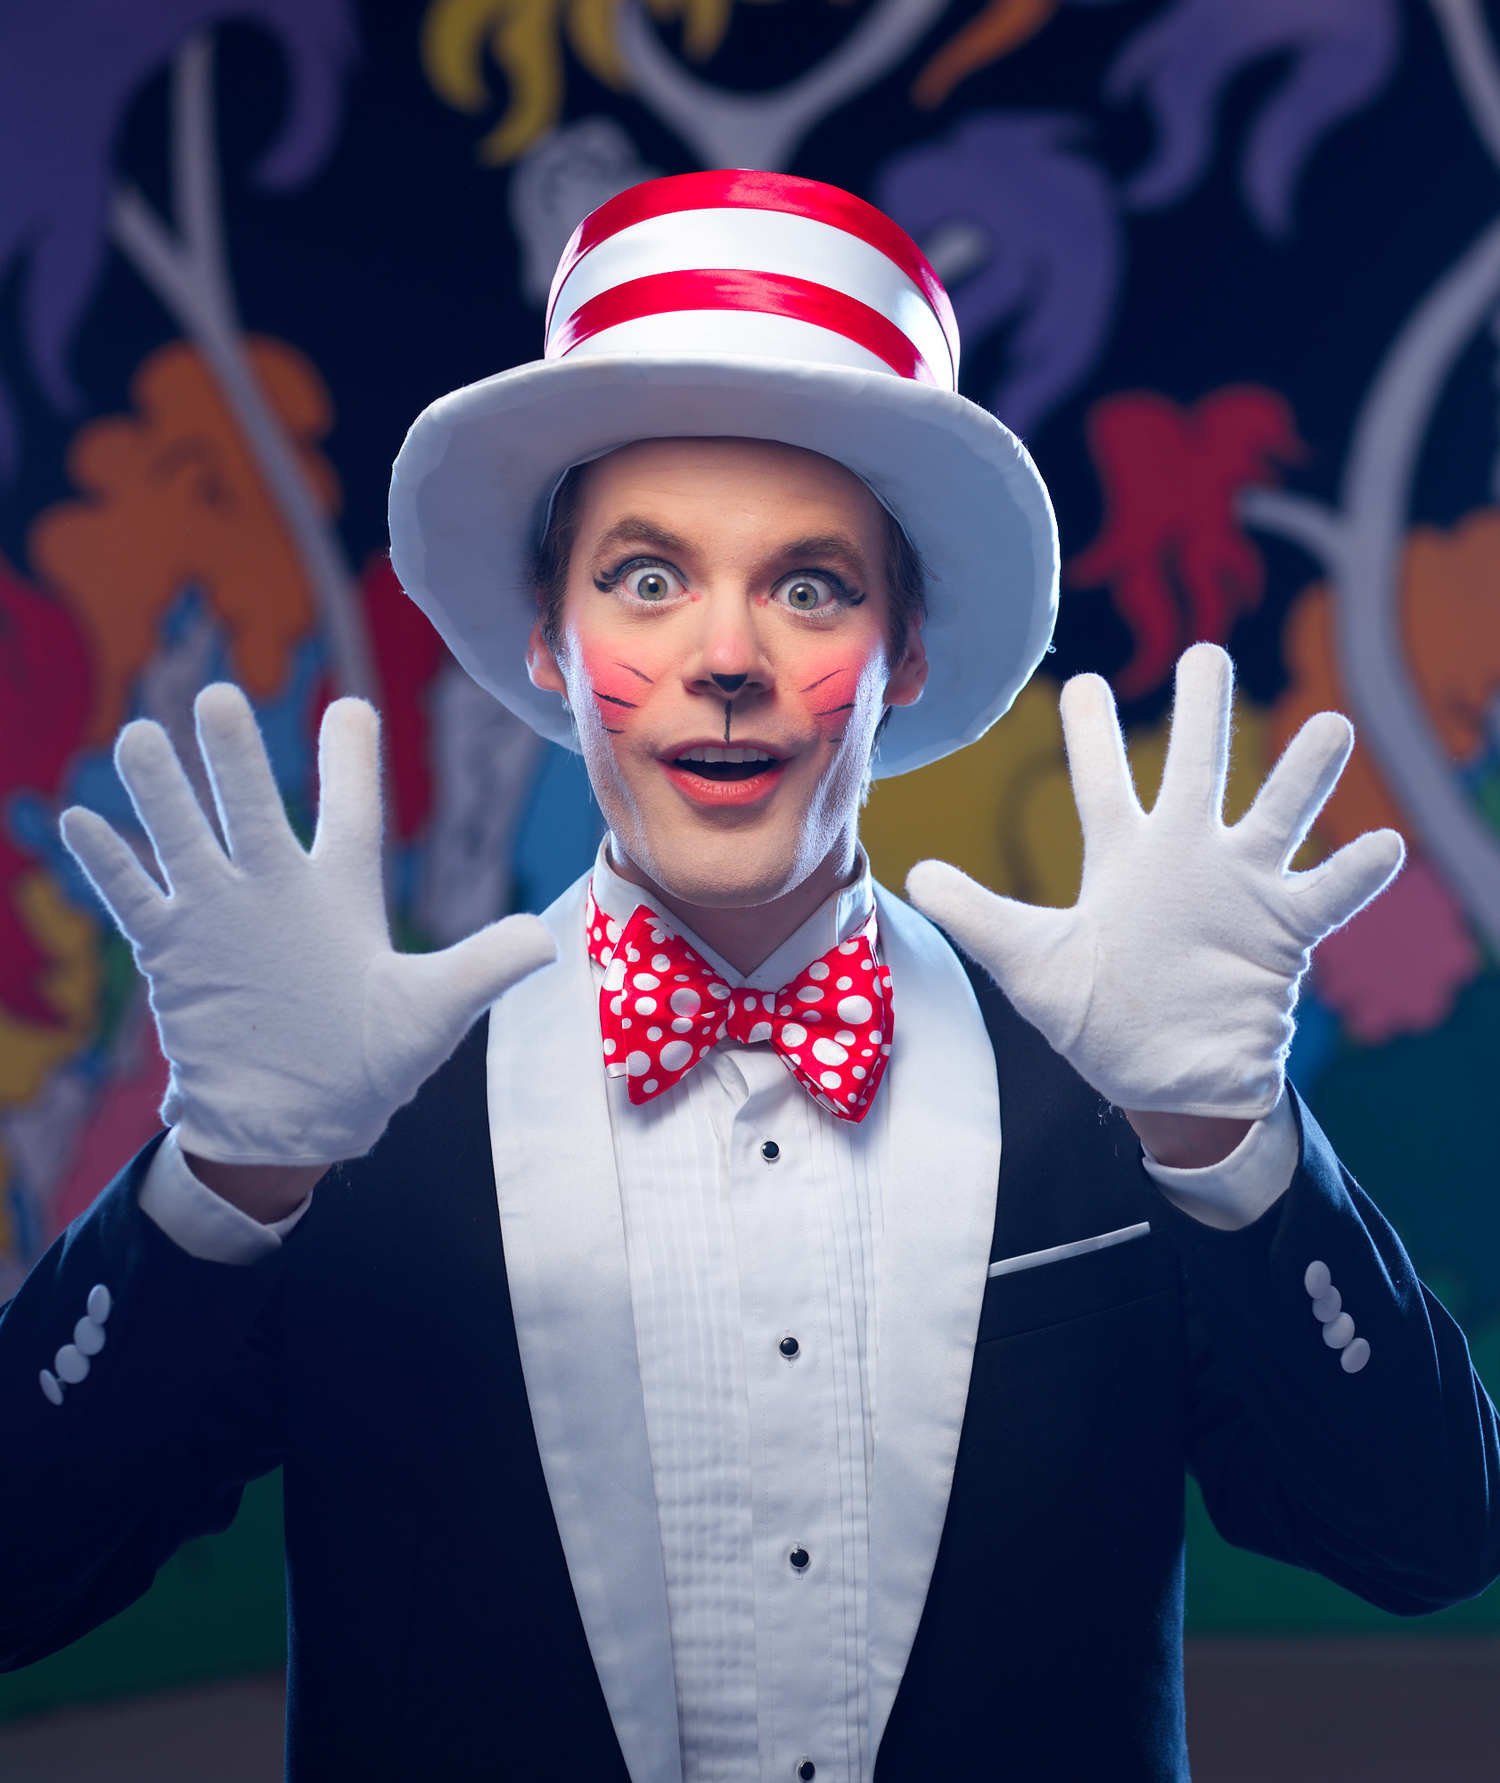 Max Herzfeld is Cat in the Hat! | Photo by William Vasta Photography (2018)